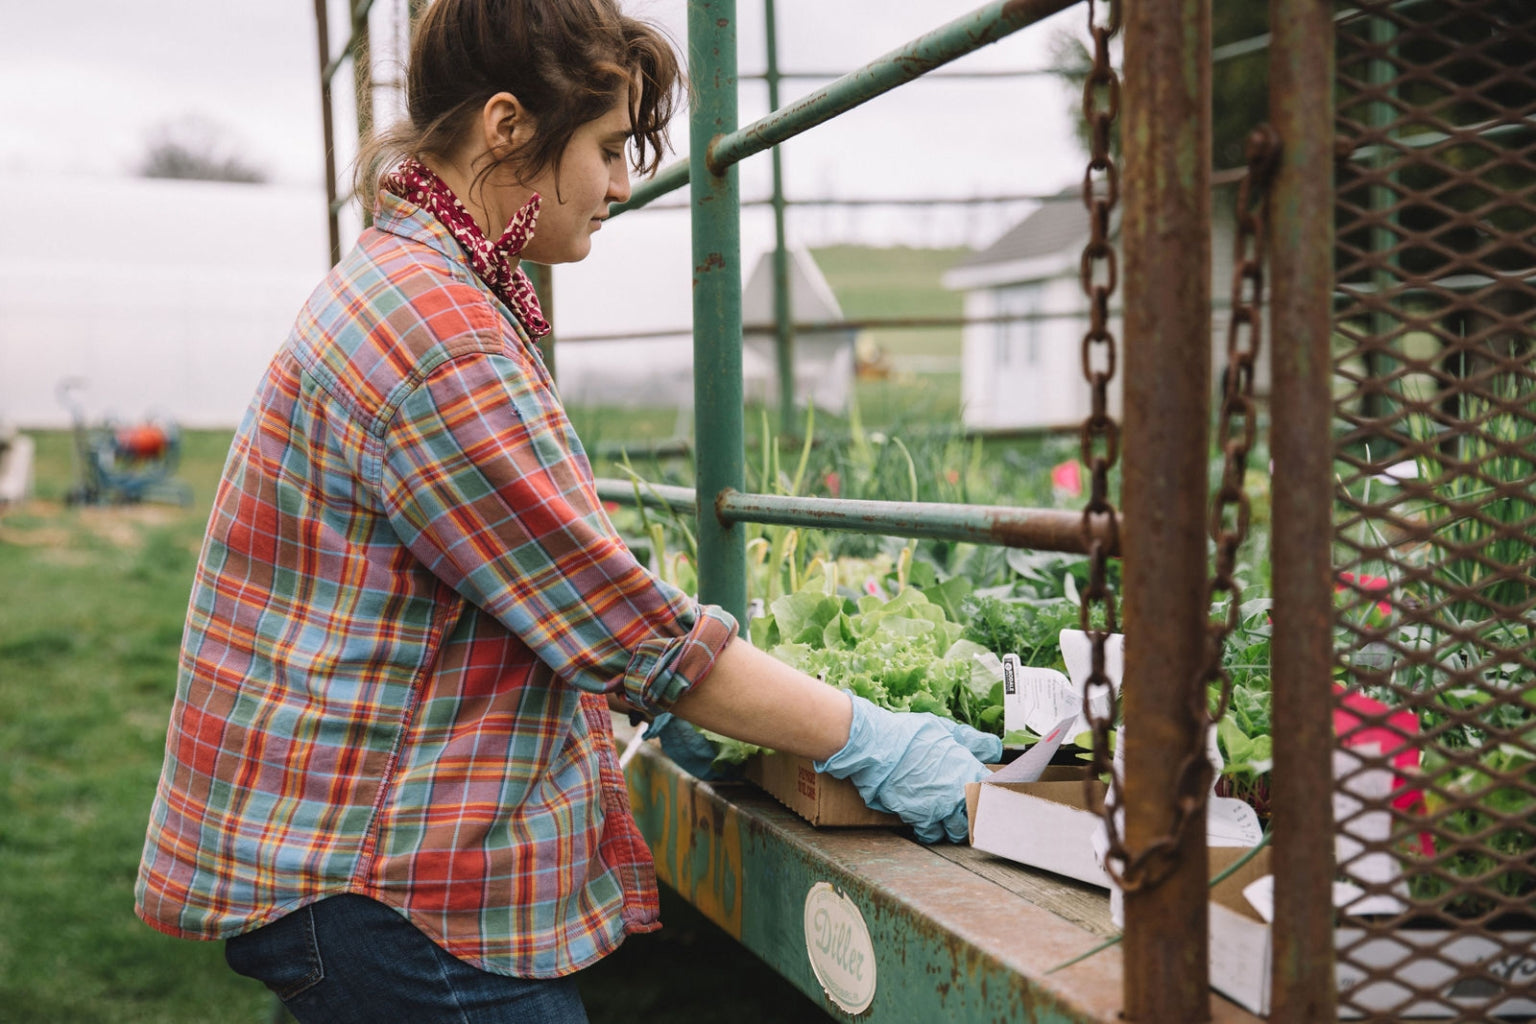 Rodale intern Bree Hersch gets her hands dirty during her daily chores around Rodale’s main farm campus – kind of.